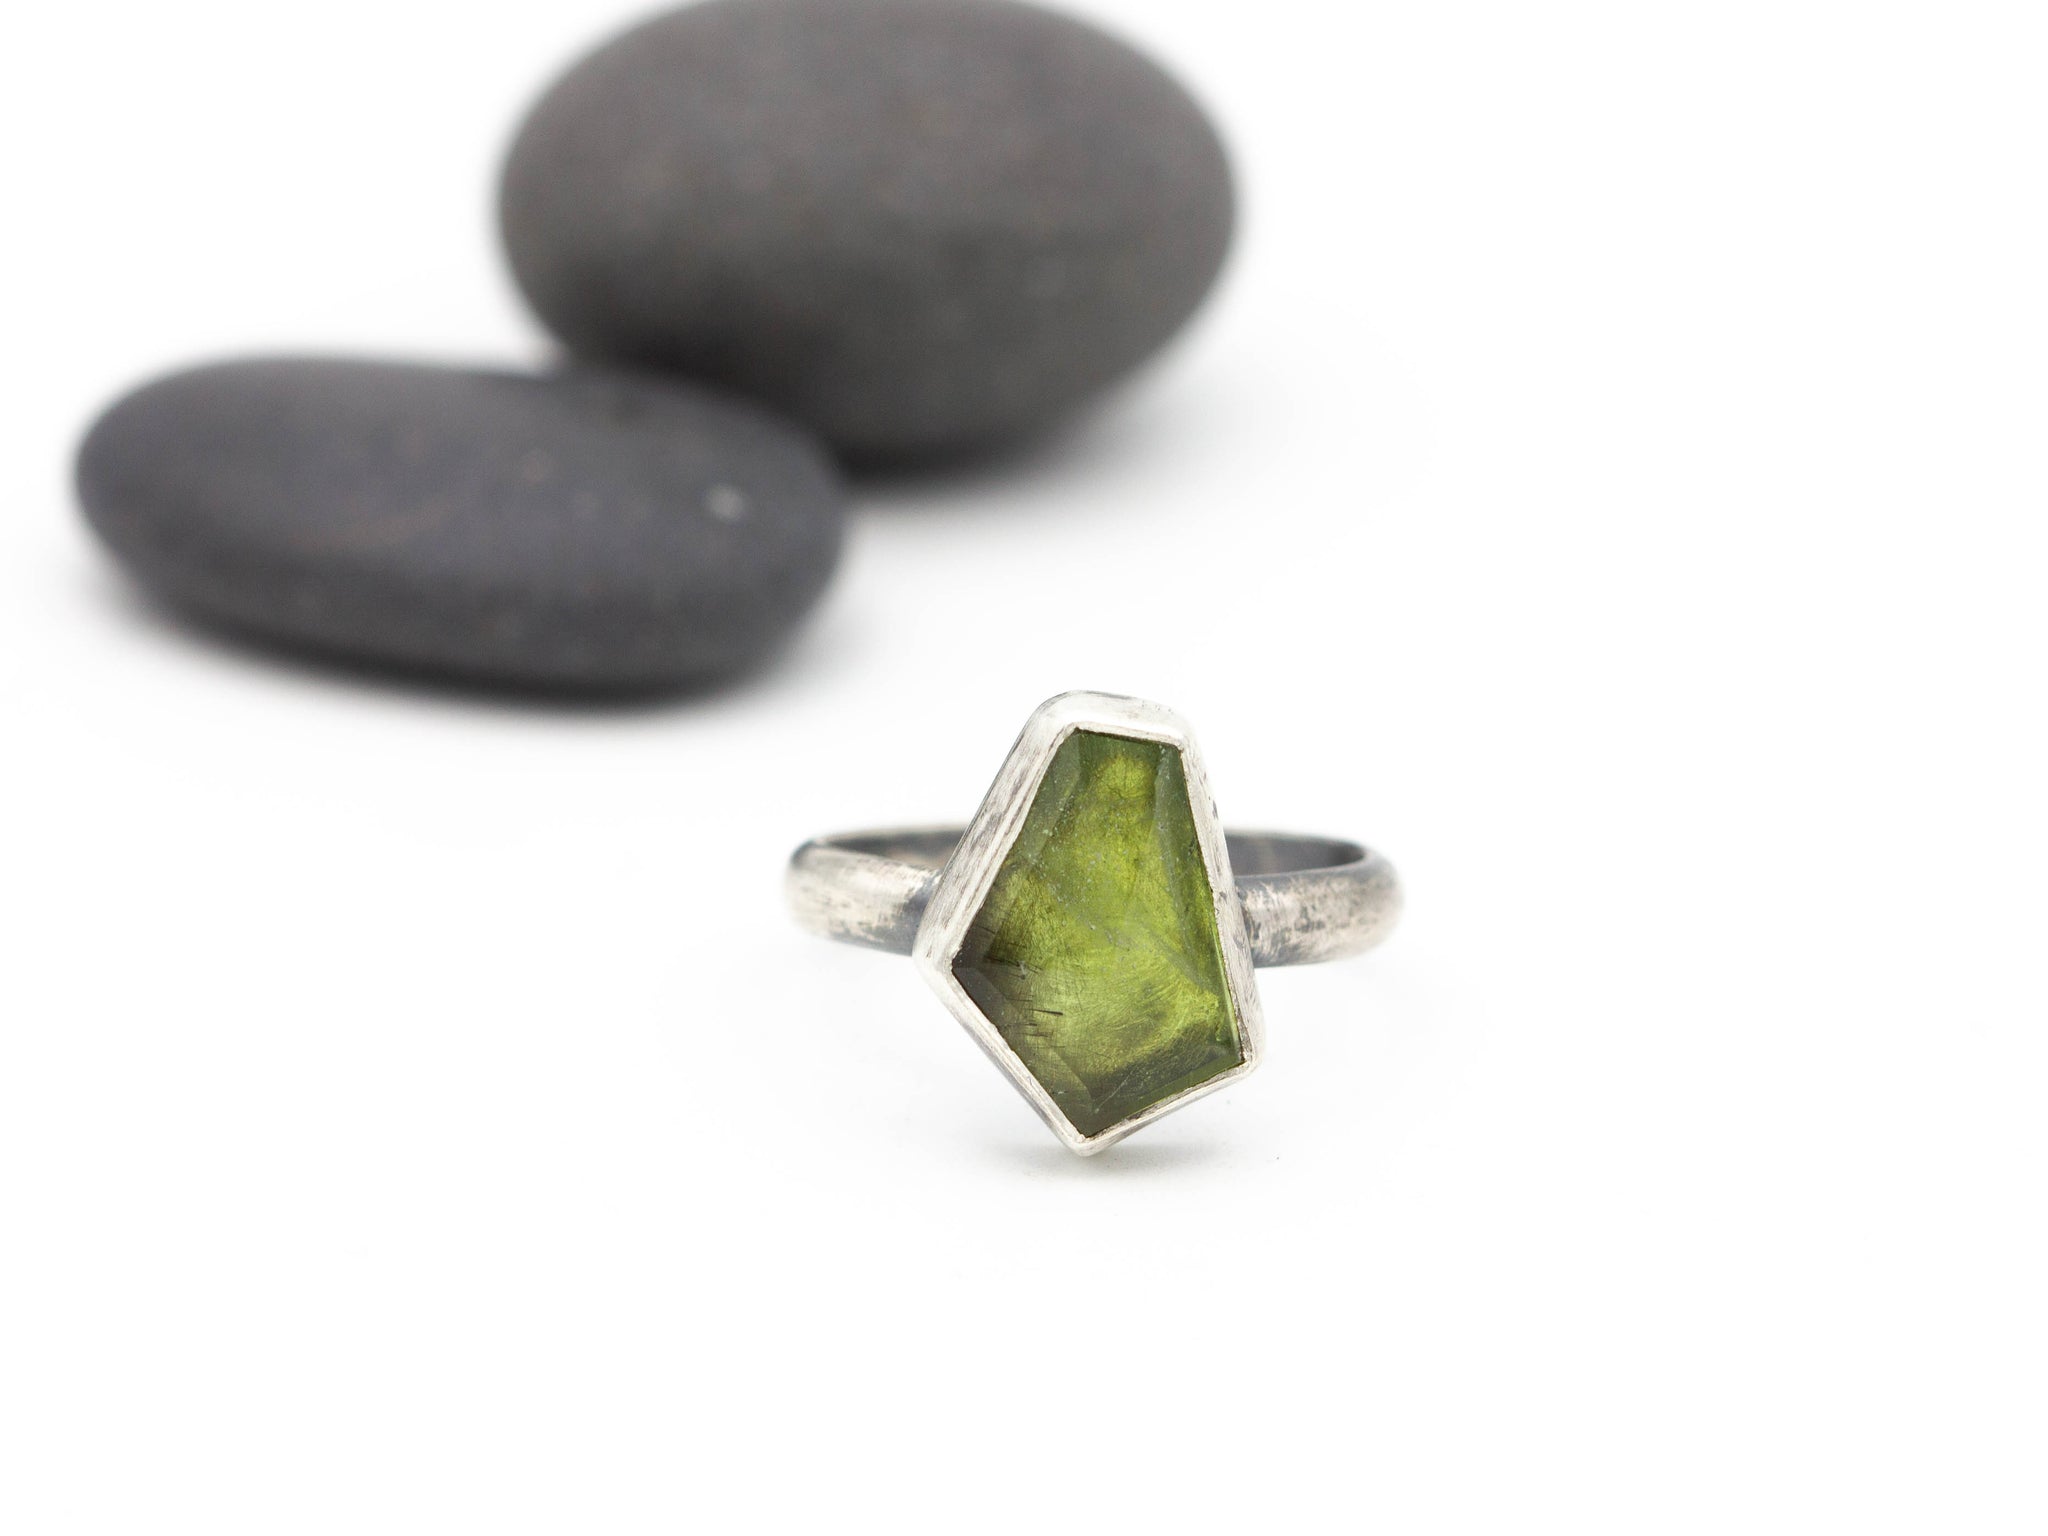 Five-sided green peridot stone with tiny black inclusions set in sterling silver as a ring